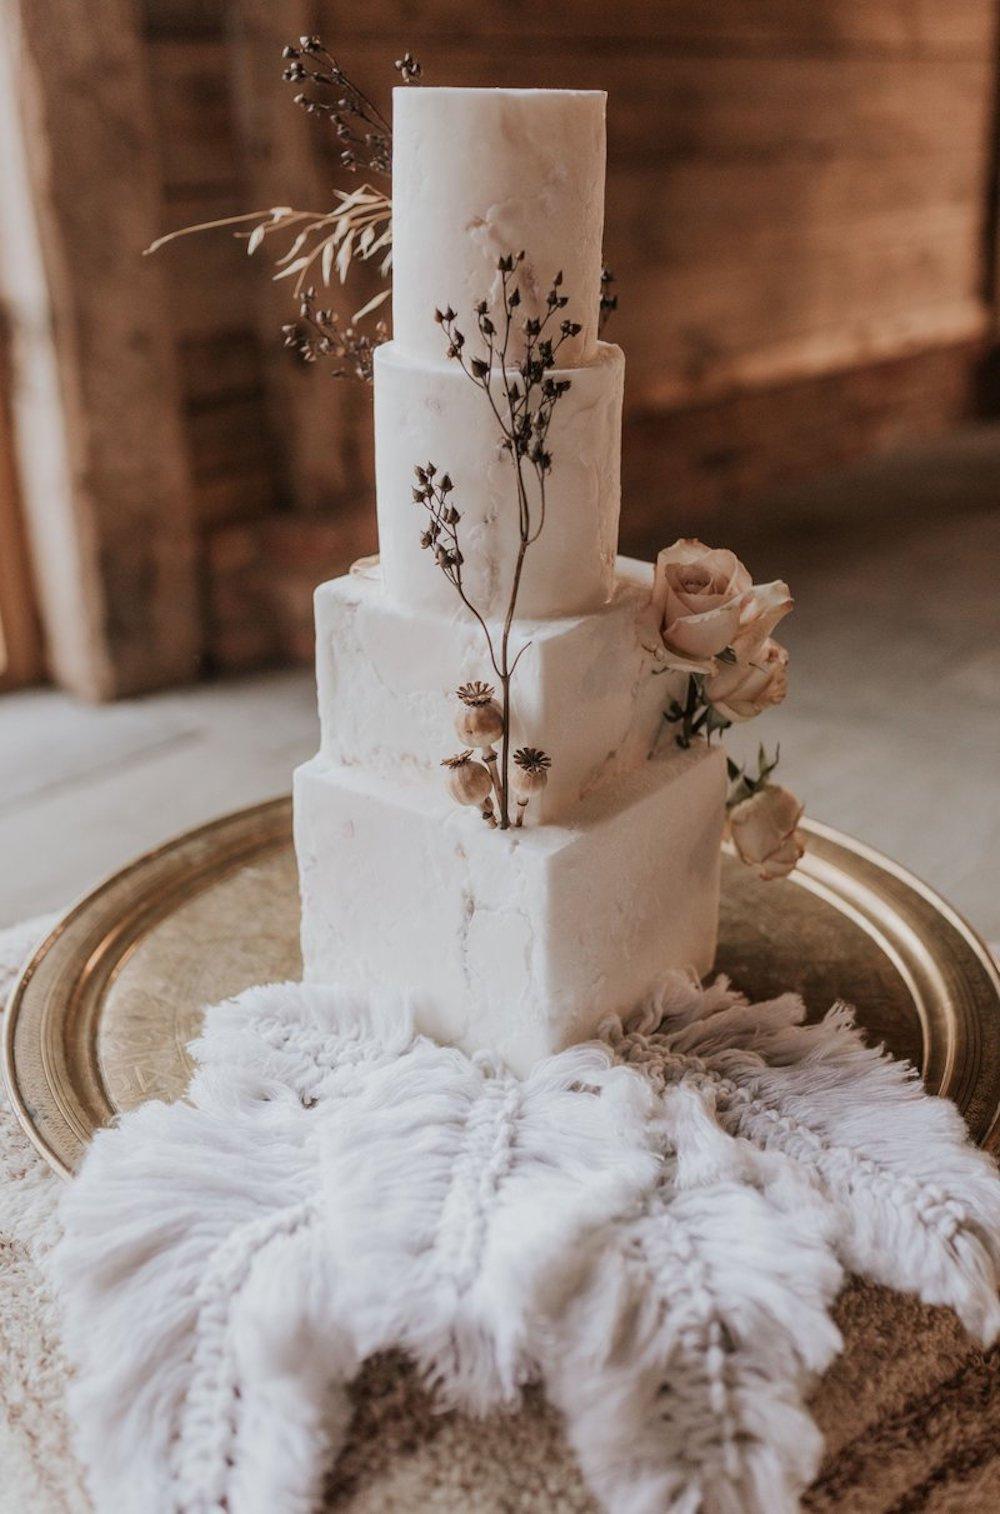 Baking Happiness For Celebrations: Share Love with these Wedding Cakes  Ideas. Image credit : Pinterest #cake #weddingcake #weddingcakes… |  Instagram